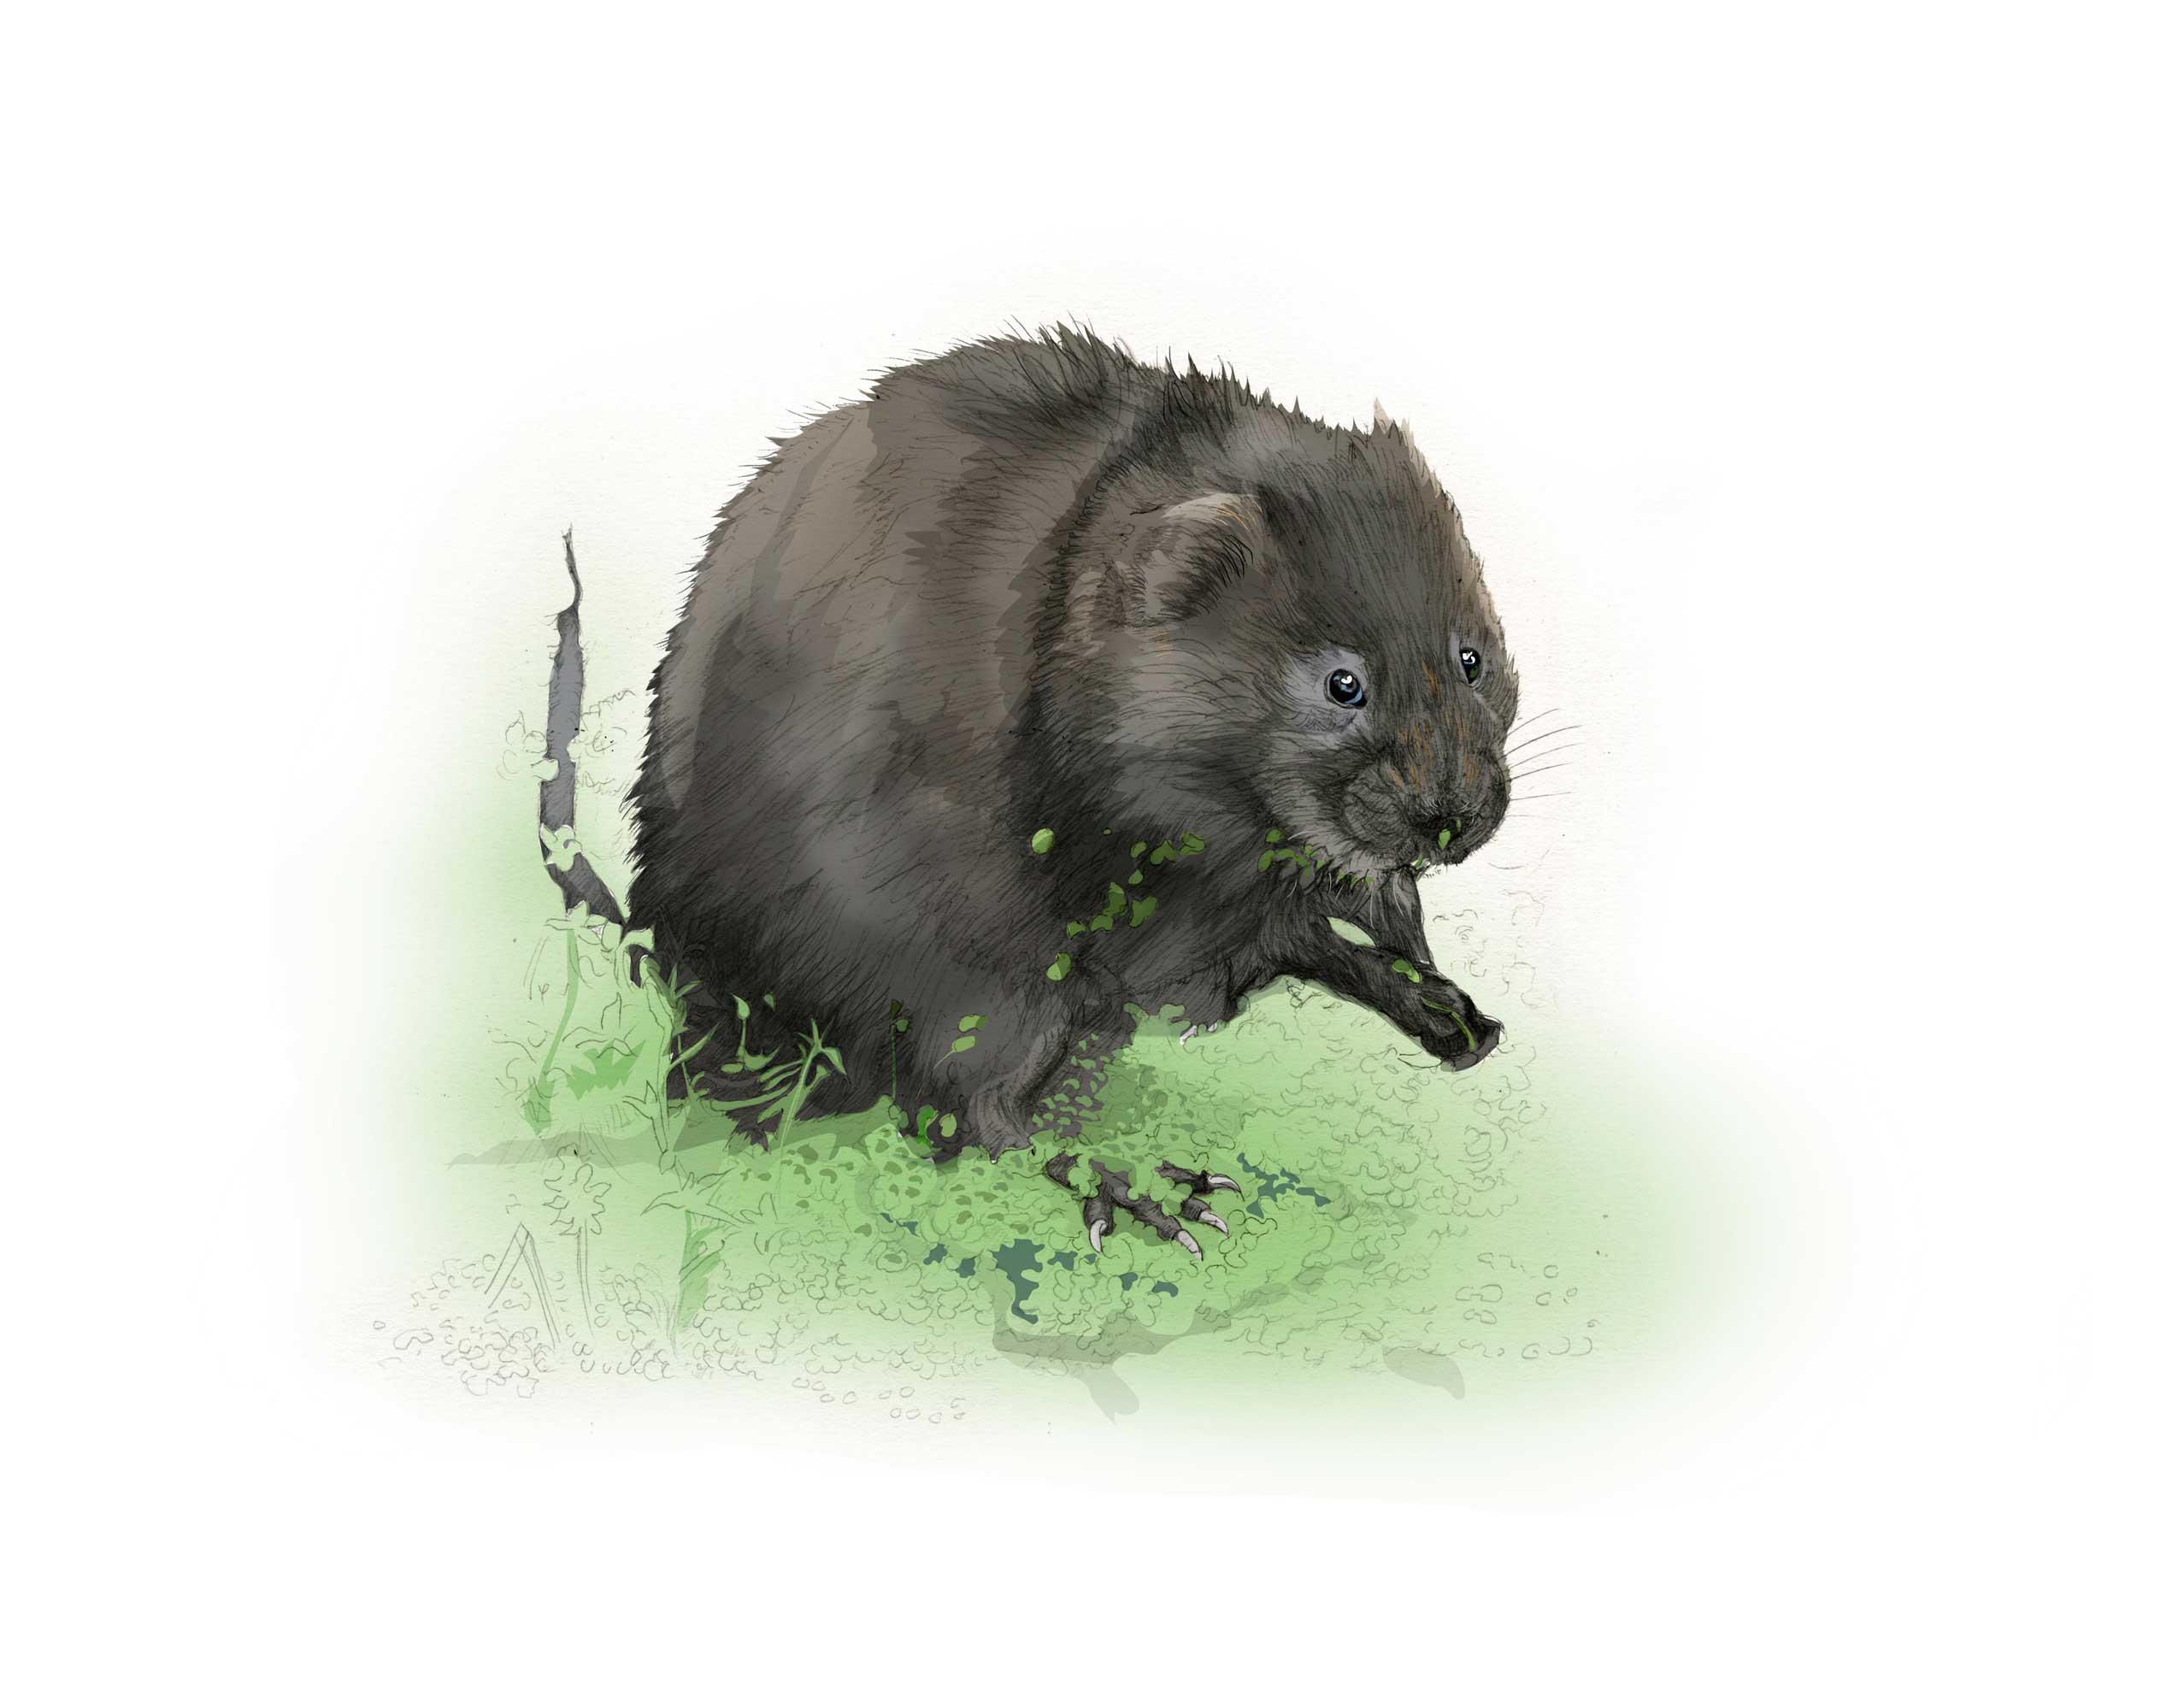 Water vole illustration by Nick Ellwood.